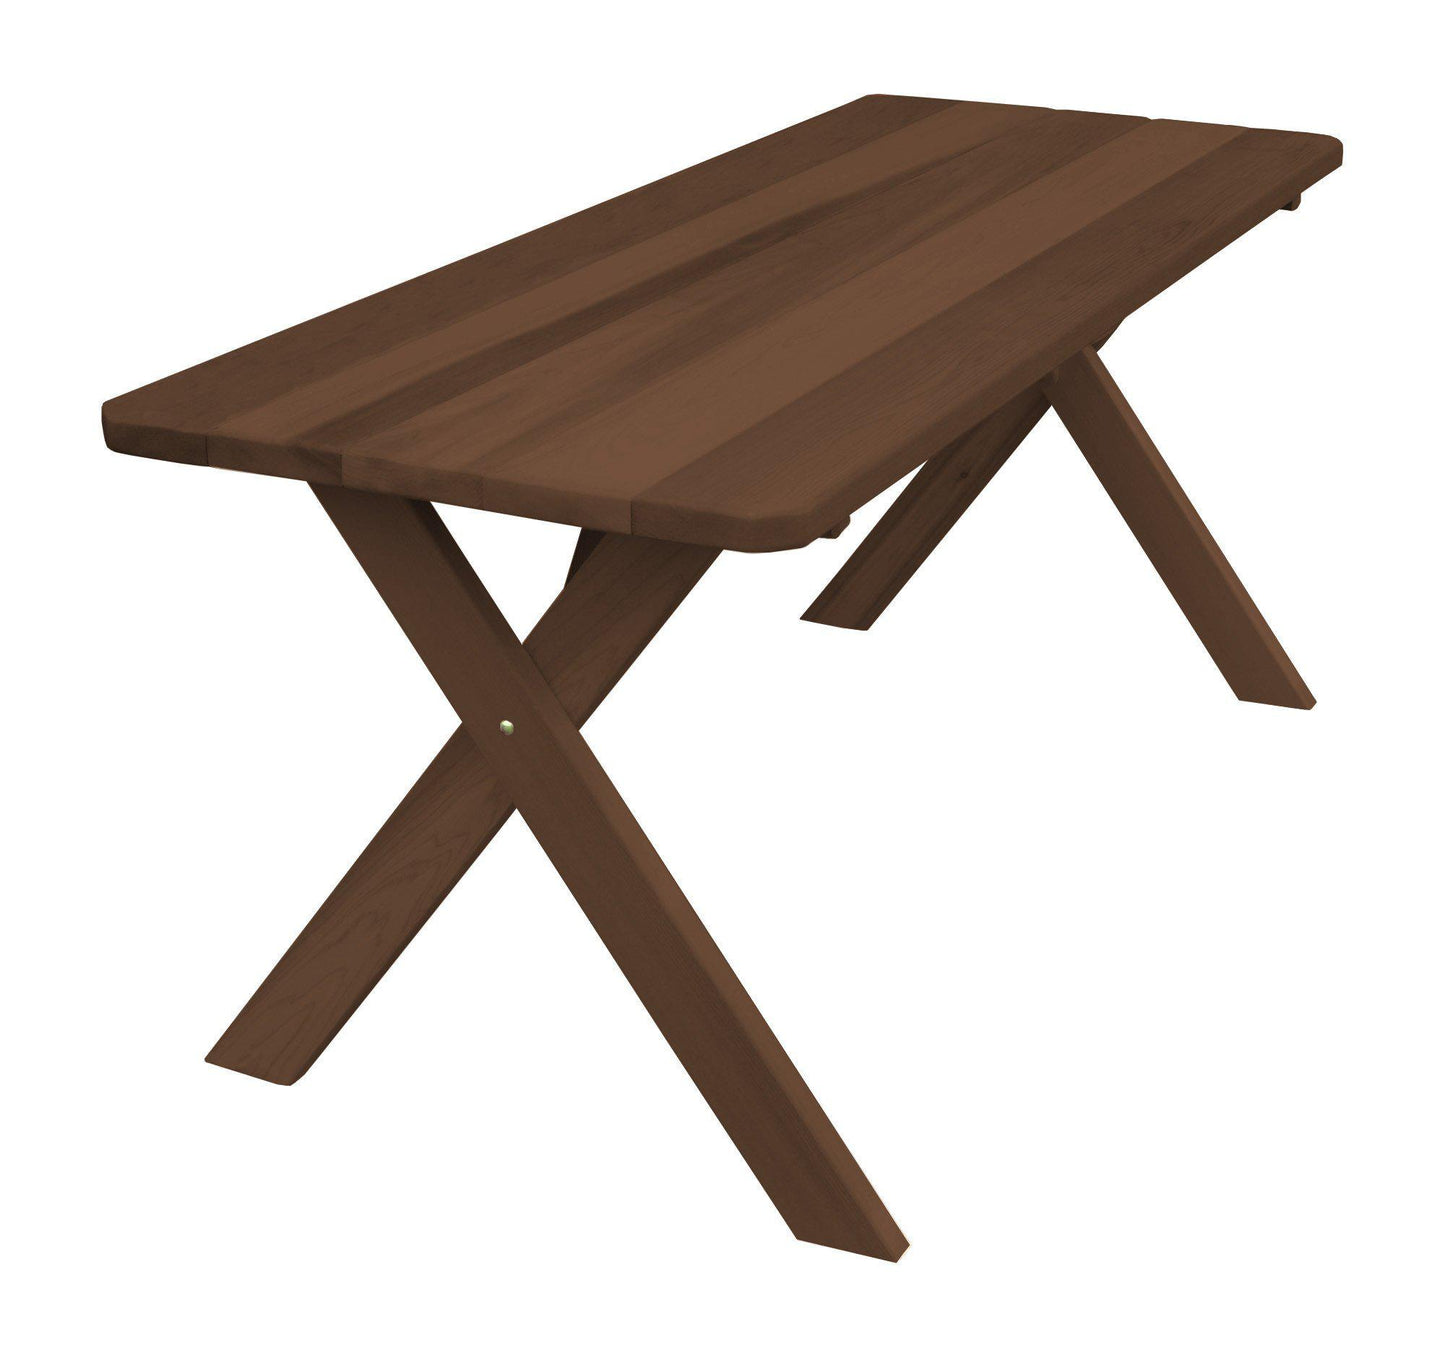 A&L FURNITURE CO.Western Red Cedar 94" Cross-leg Table Only - Specify for FREE 2" Umbrella Hole - LEAD TIME TO SHIP 2 WEEKS